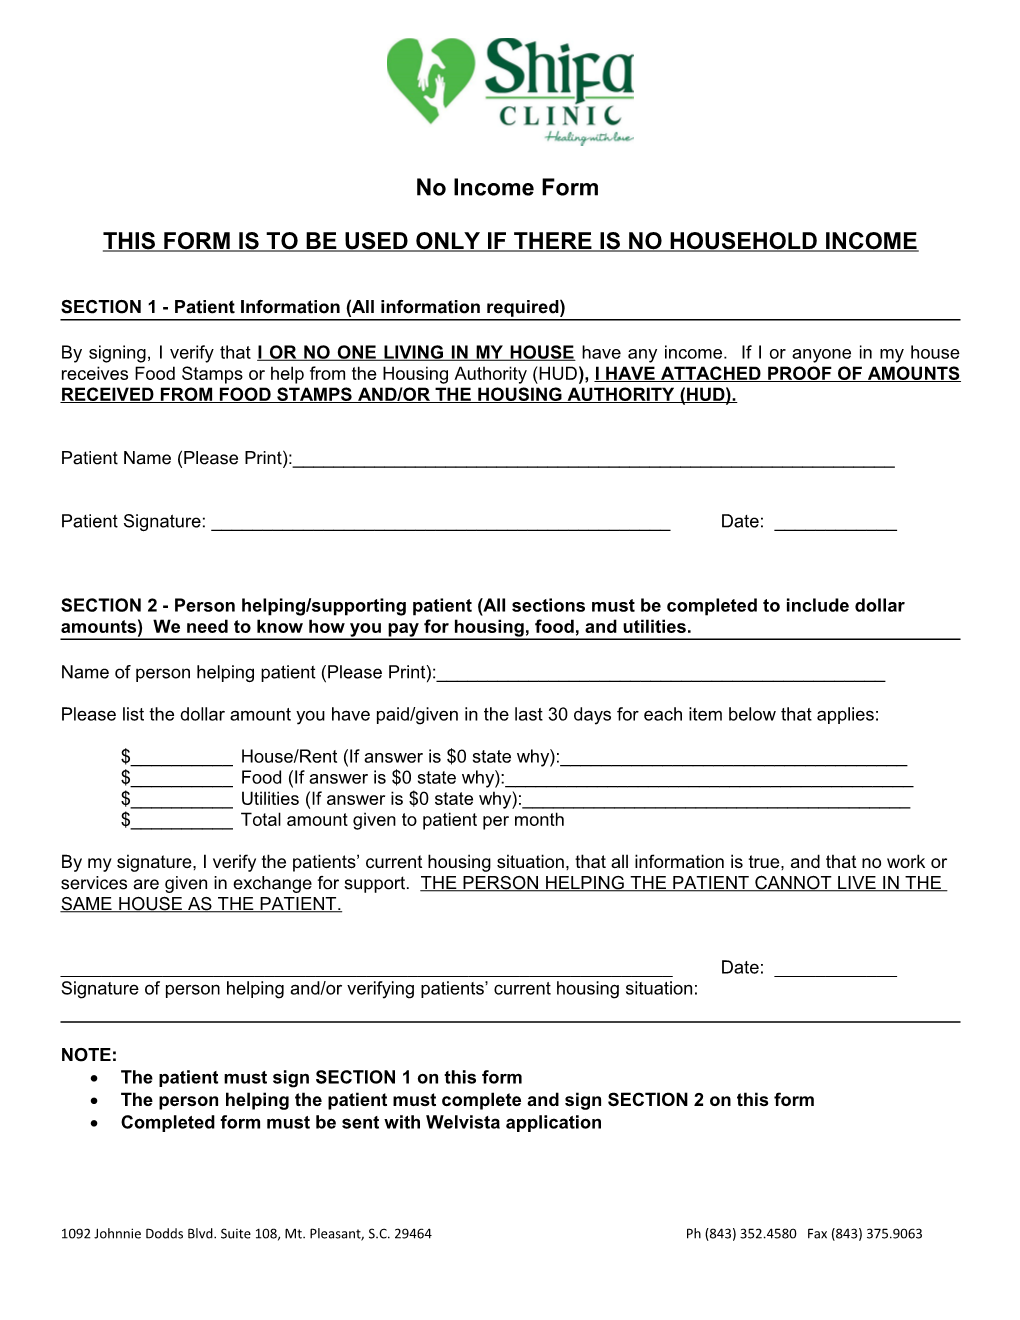 This Form Is to Be Used Only If There Is No Household Income